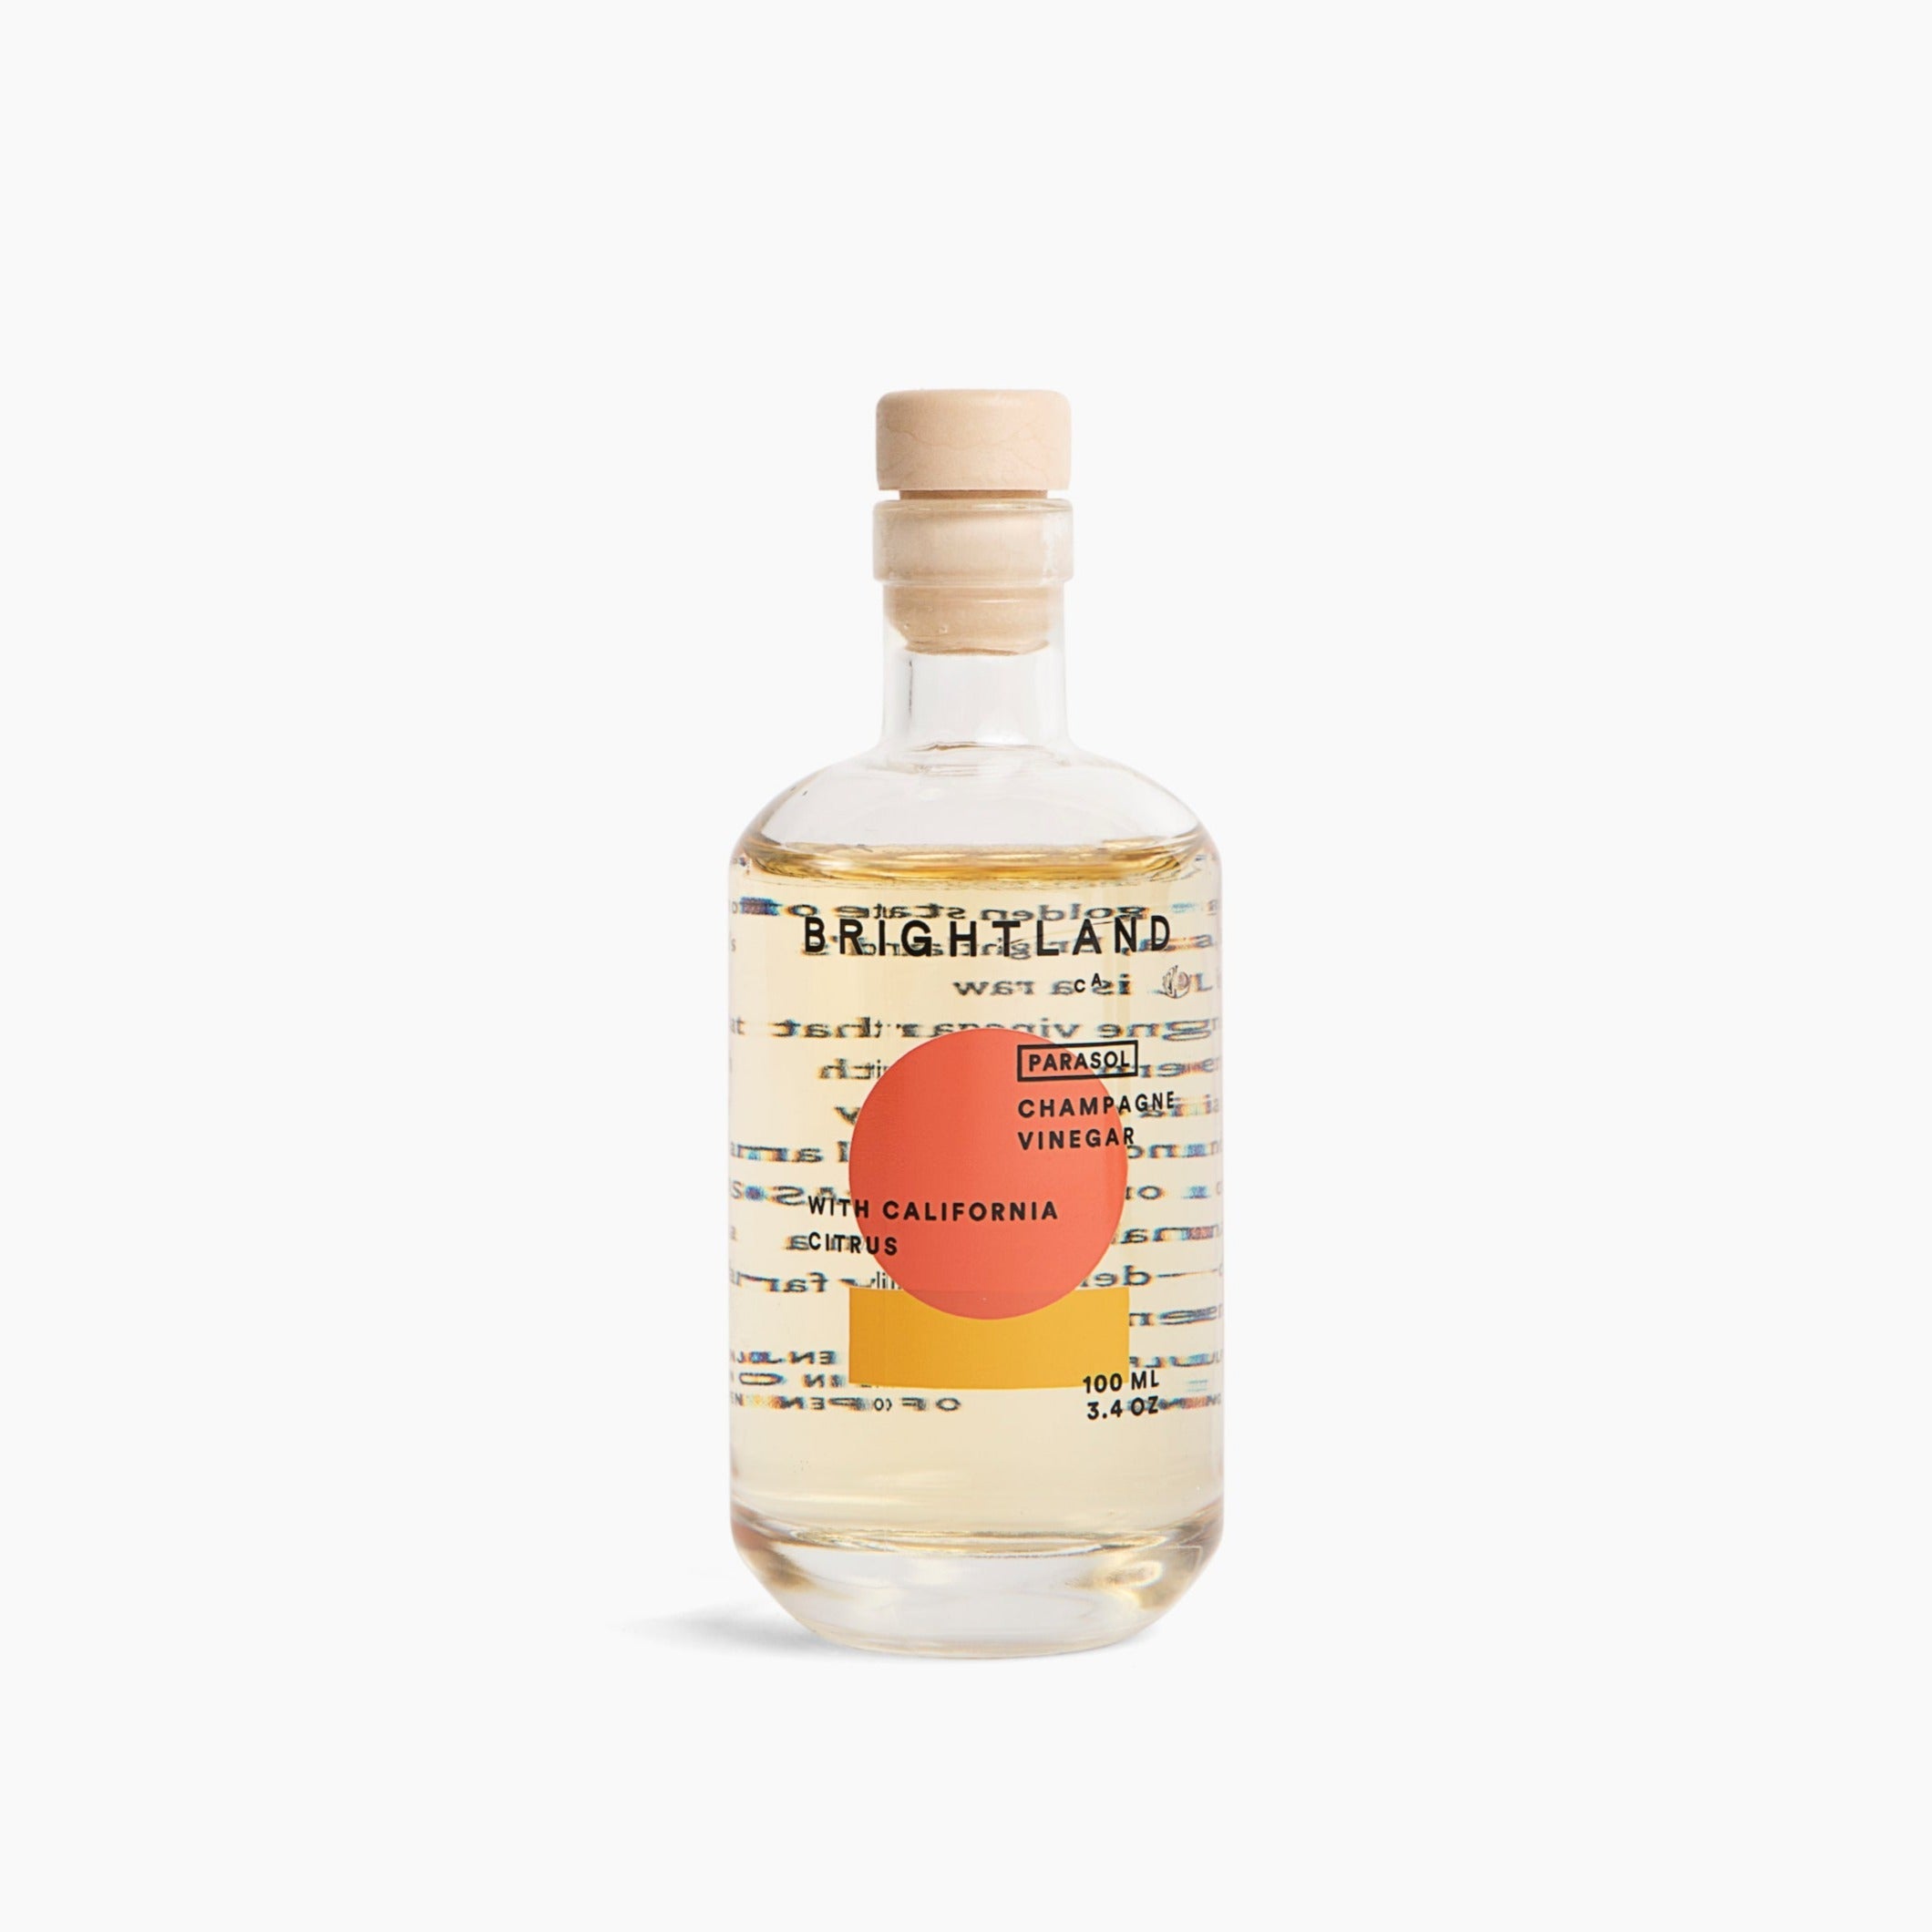 A clear glass bottle with orange and yellow geometric motifs with the following in black writing &quot;BRIGHTLAND CA PARASOL CHAMPAGNE VINEGAR WITH CALIFORNIA CITRUS 100ML 3.4 OZ&quot; photographed on white background.